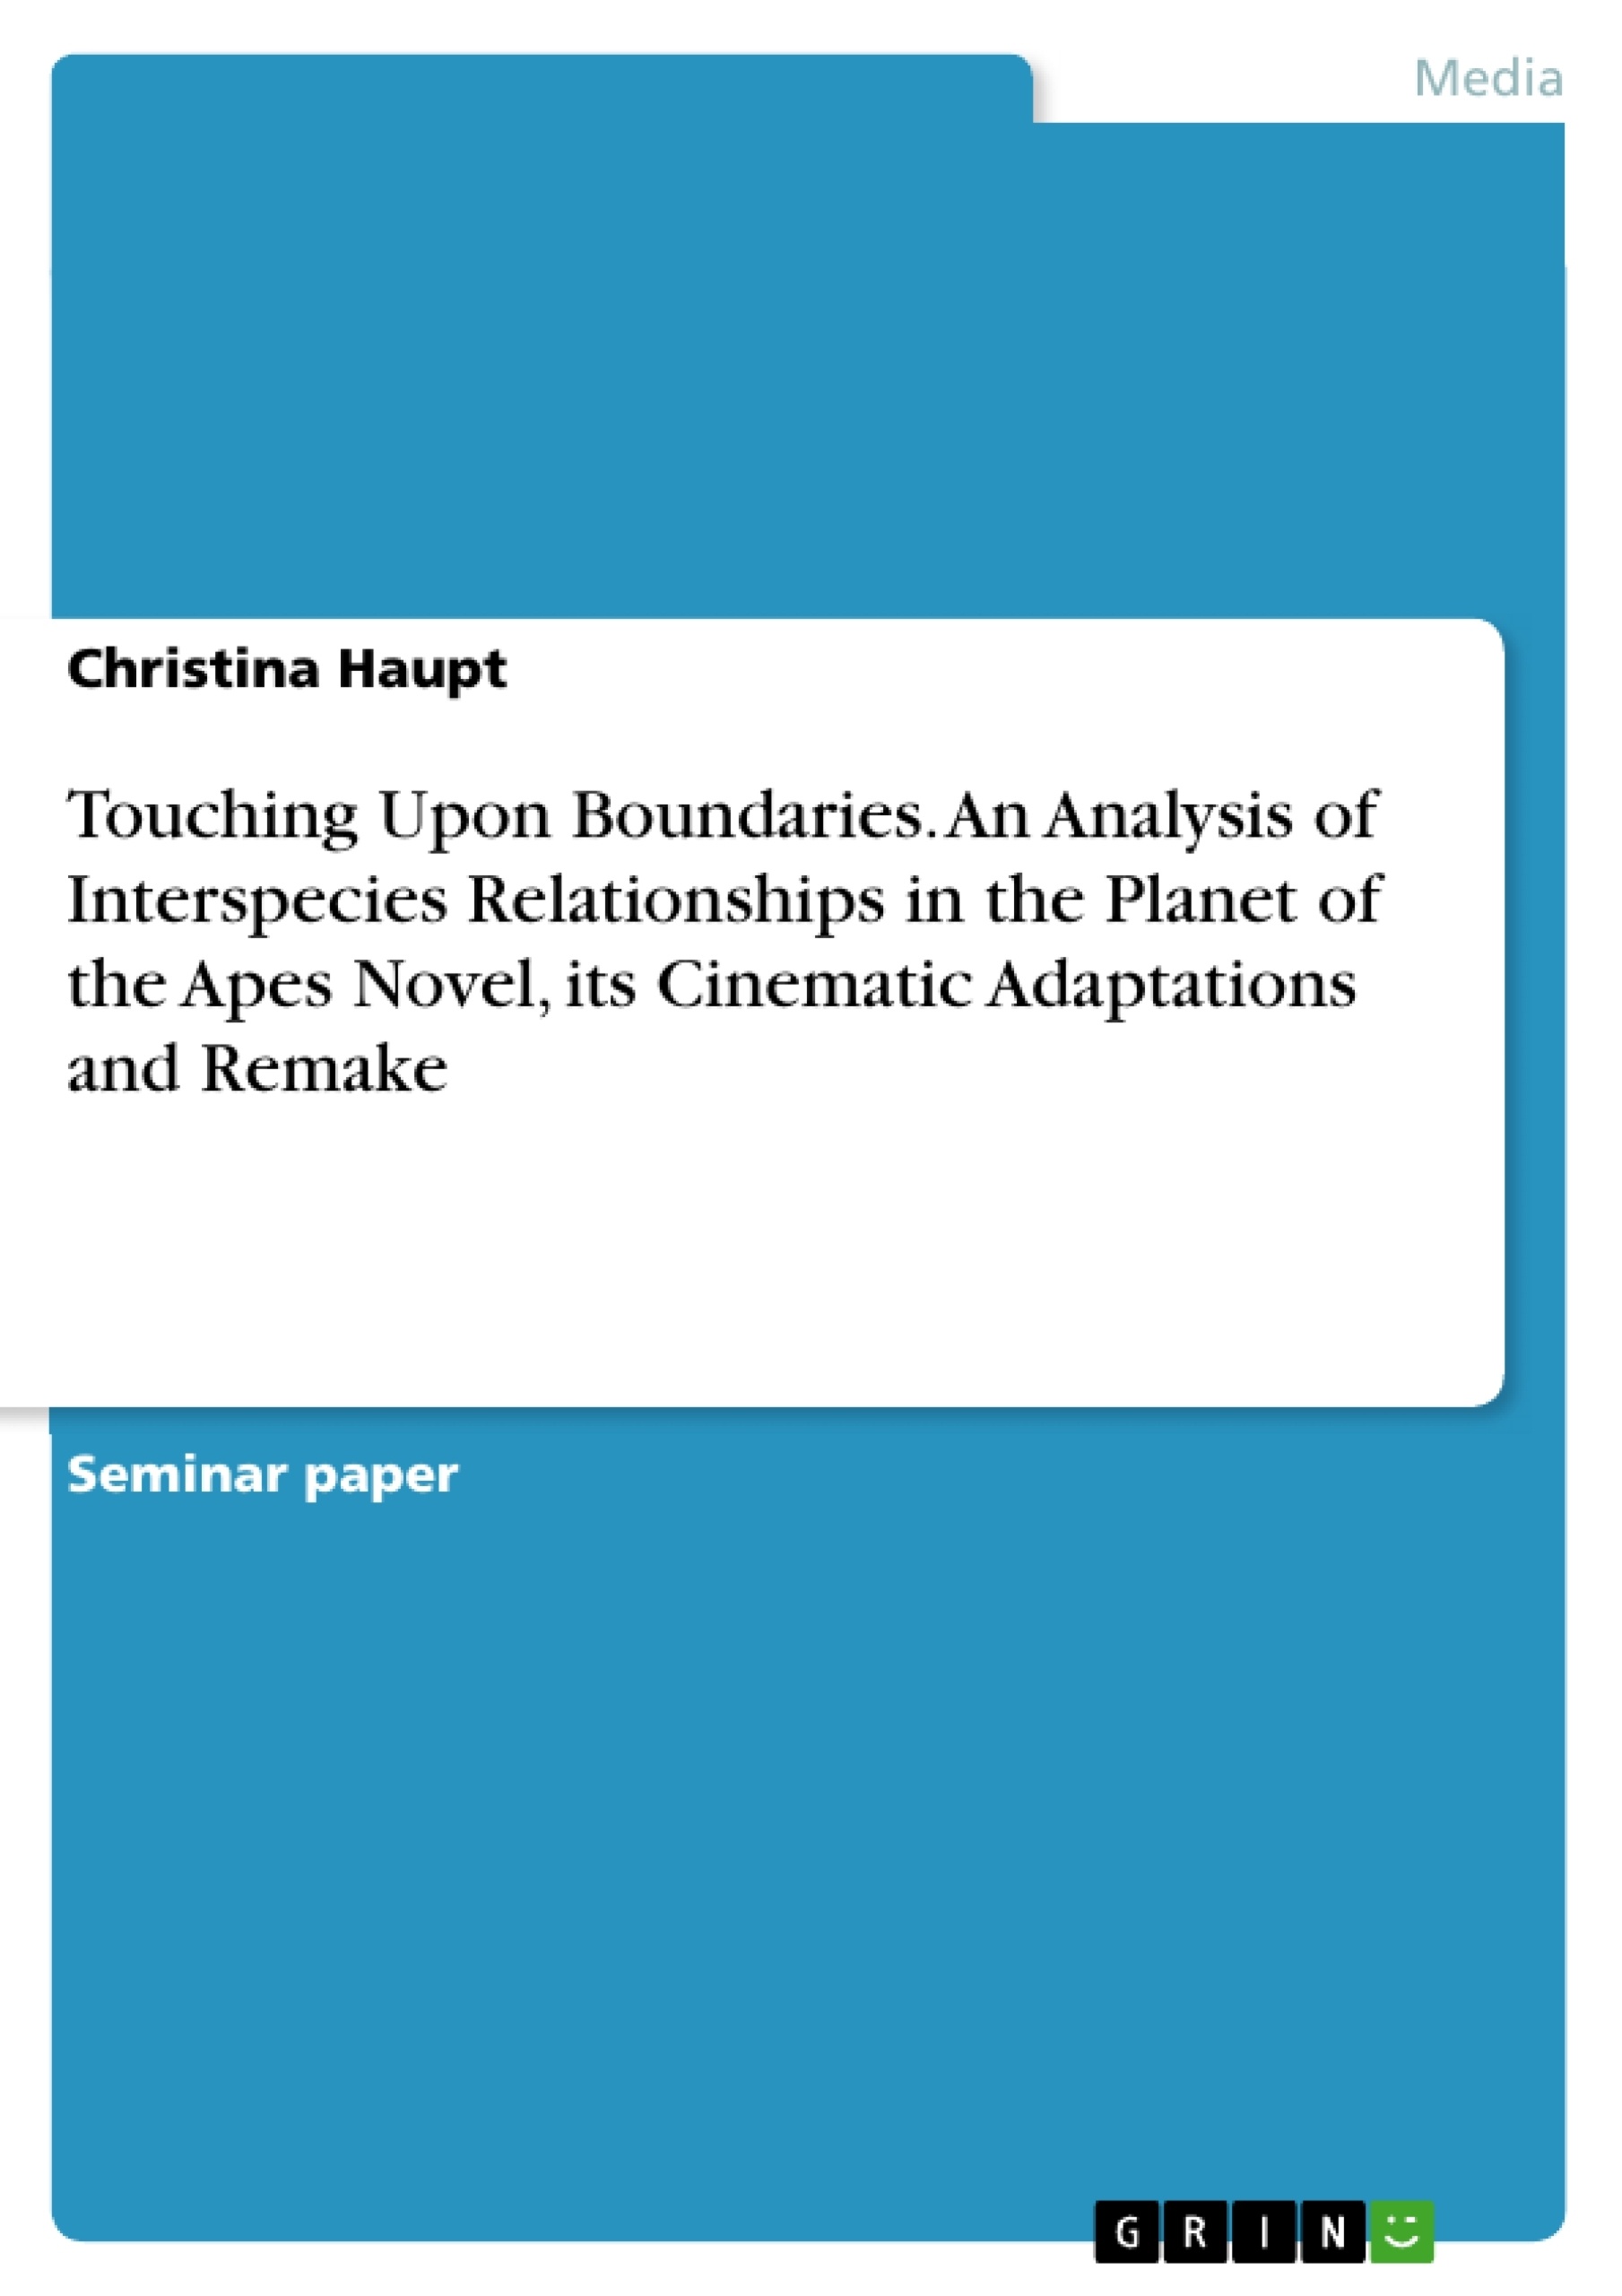 Título: Touching Upon Boundaries. An Analysis of Interspecies Relationships in the Planet of the Apes Novel, its Cinematic Adaptations and Remake